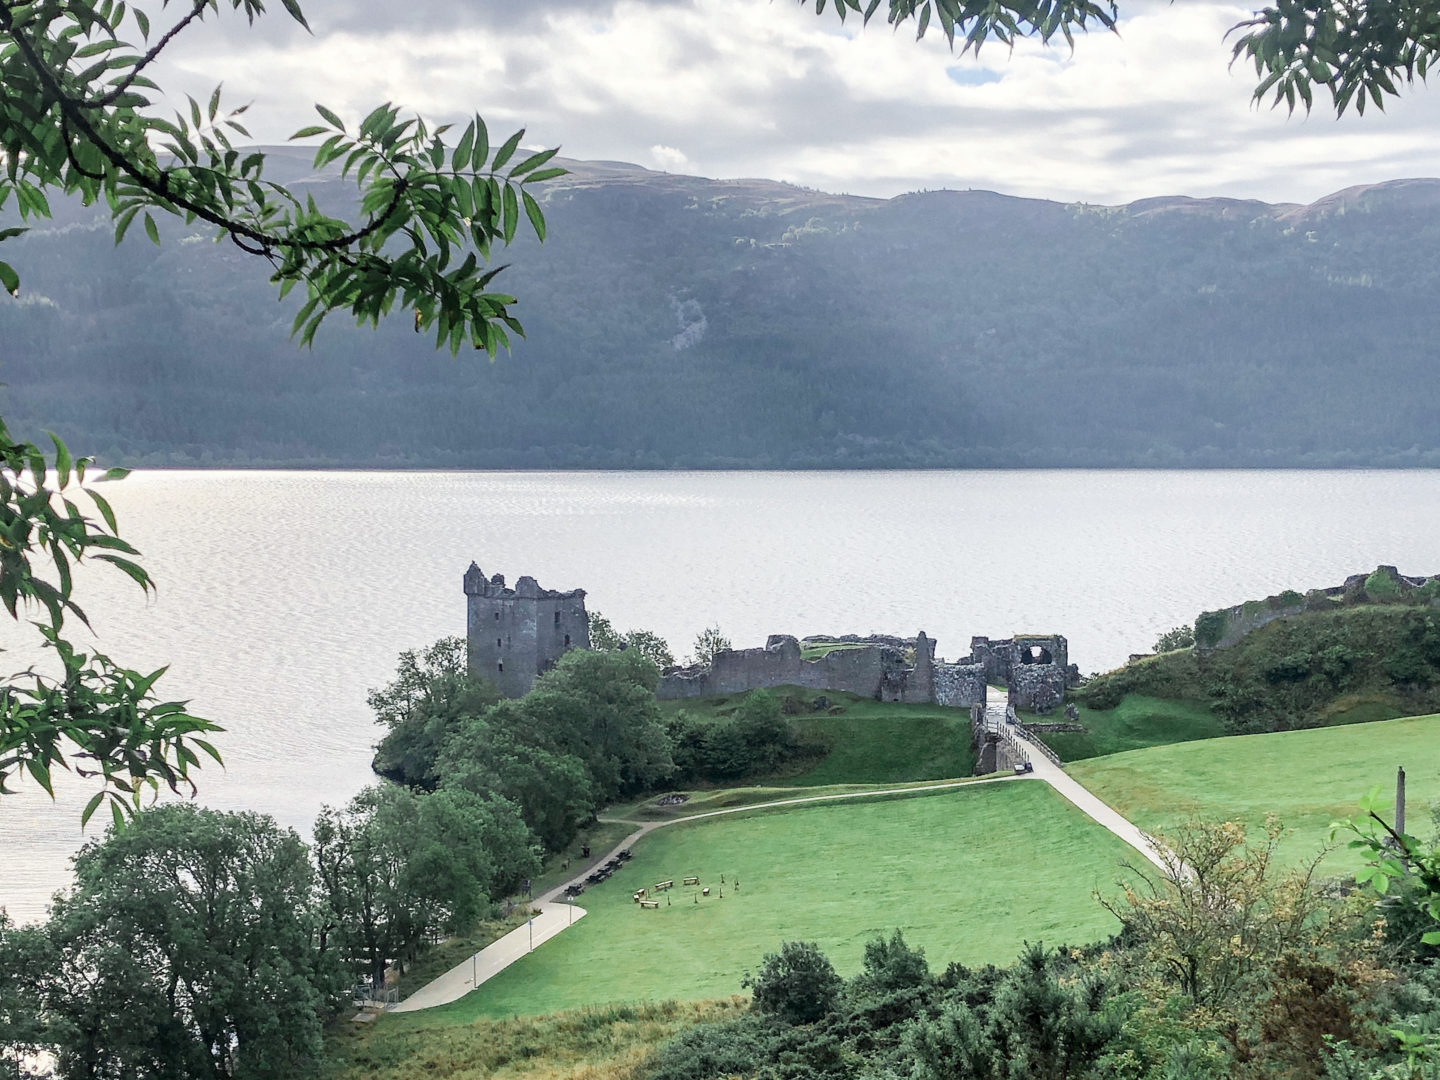 Exterior of Urquhart Castle in distance behind green fiends on edge of Loch Ness in Scotland. Green hills seen on far side of the lake.